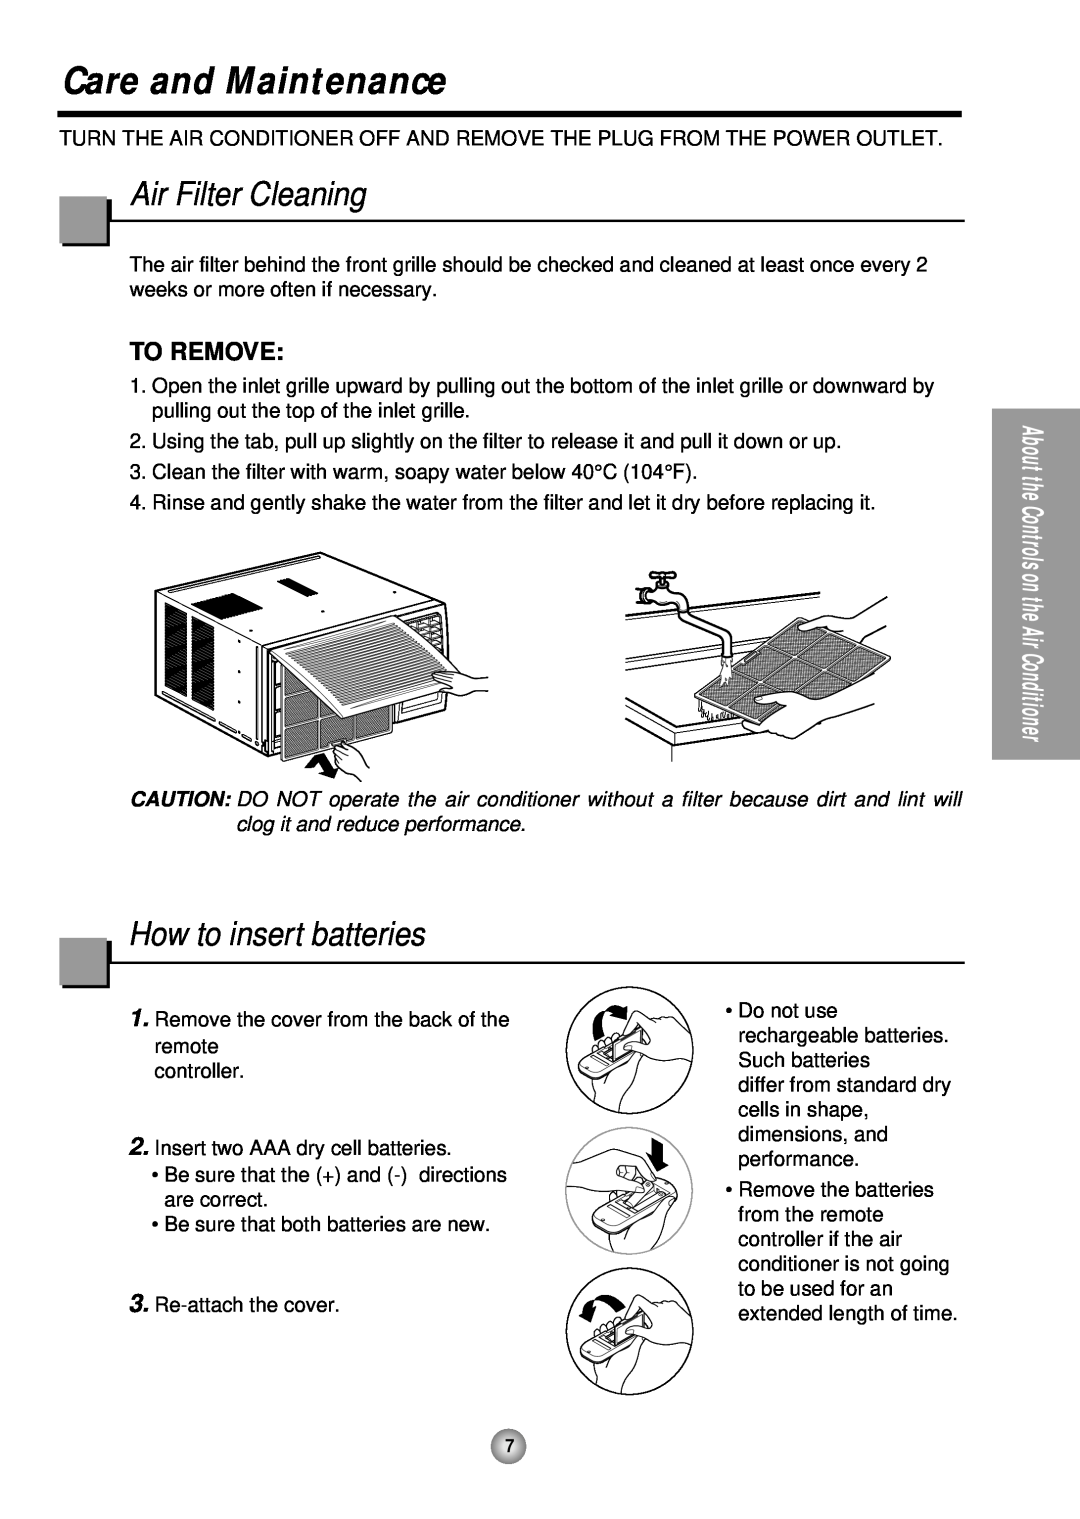 Panasonic CW-XC243HU, CW-XC183HU manual Care and Maintenance, Air Filter Cleaning, How to insert batteries, To Remove 